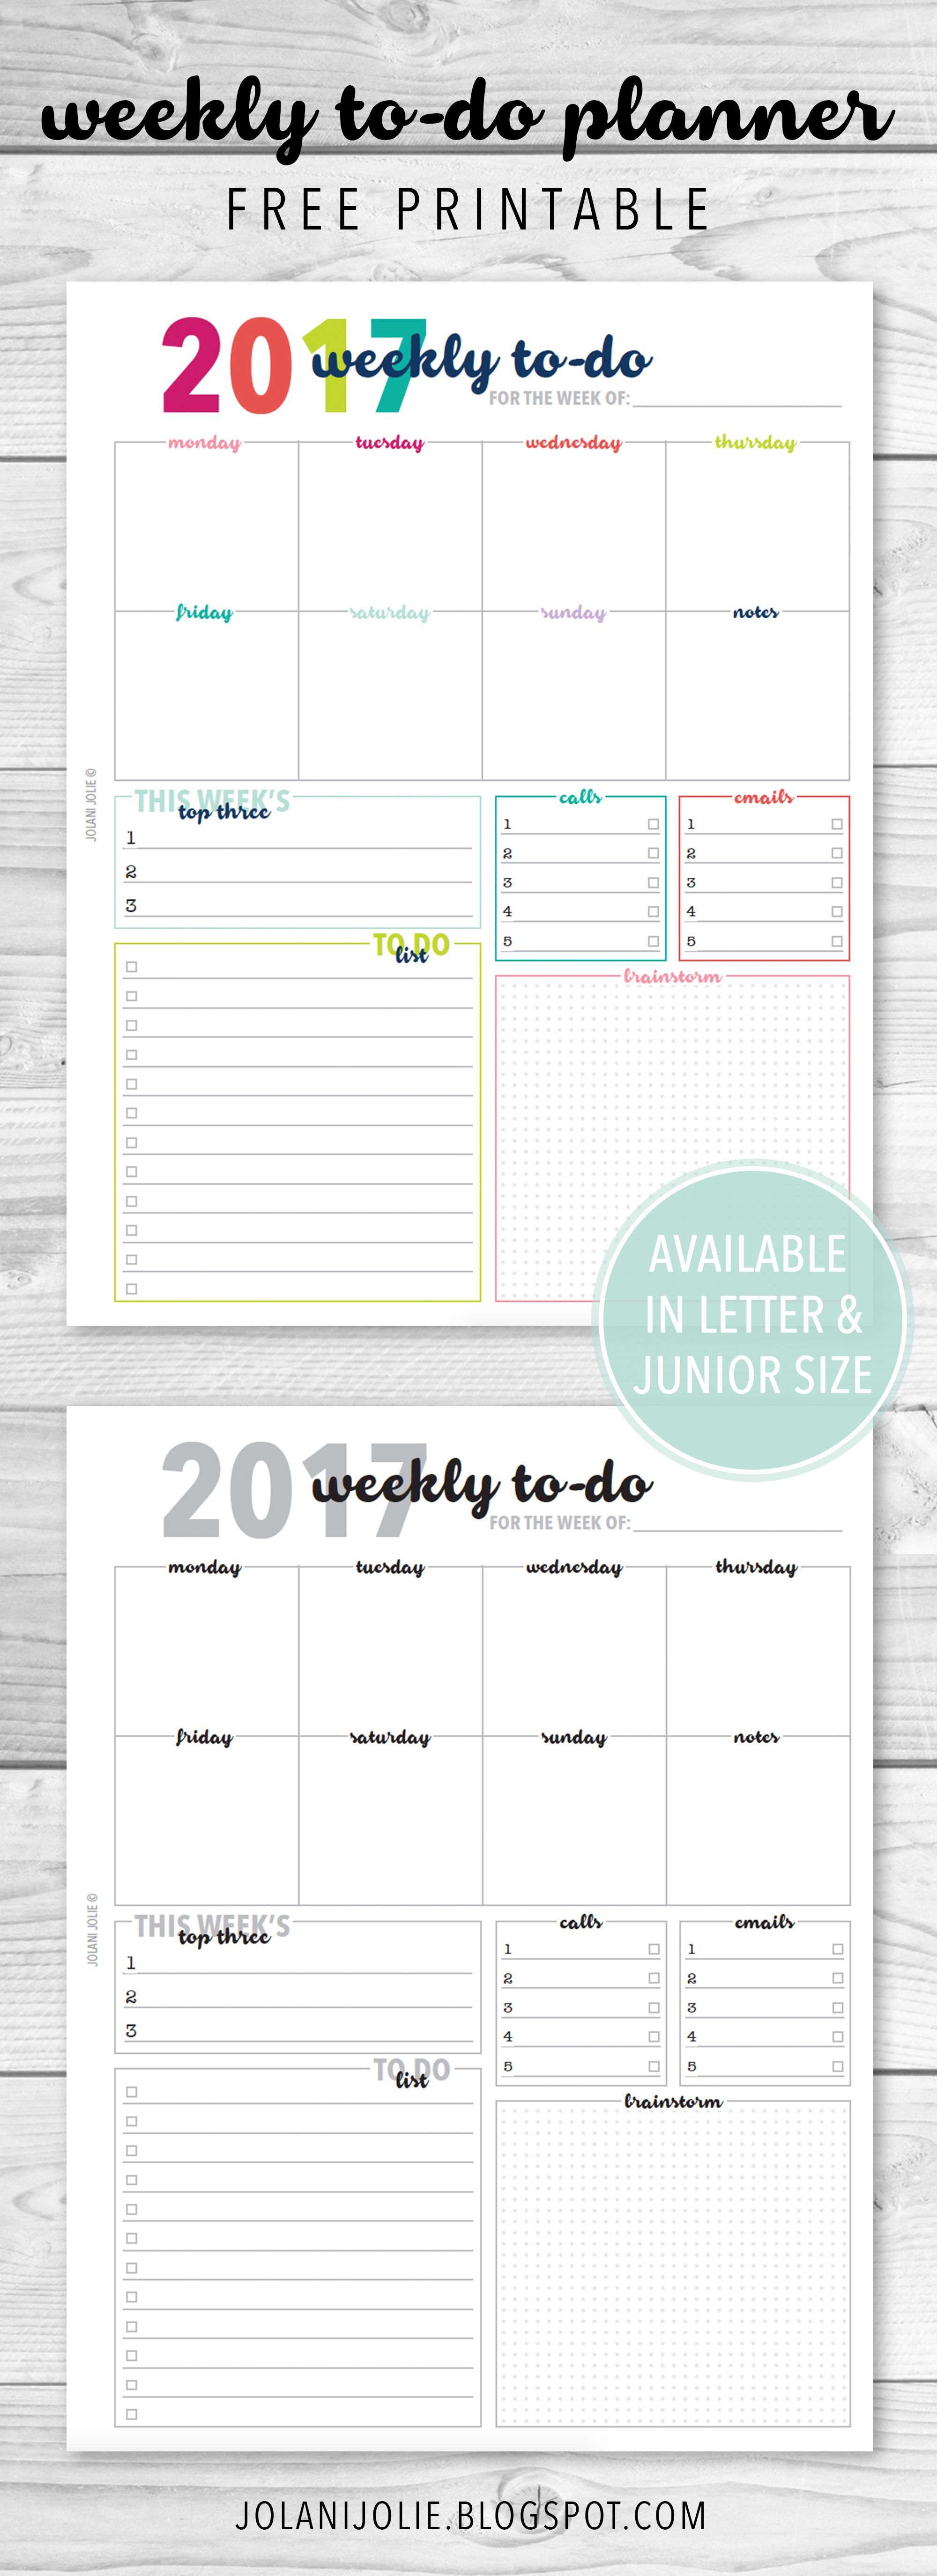 Free Printable: Weekly To Do Planner Insert